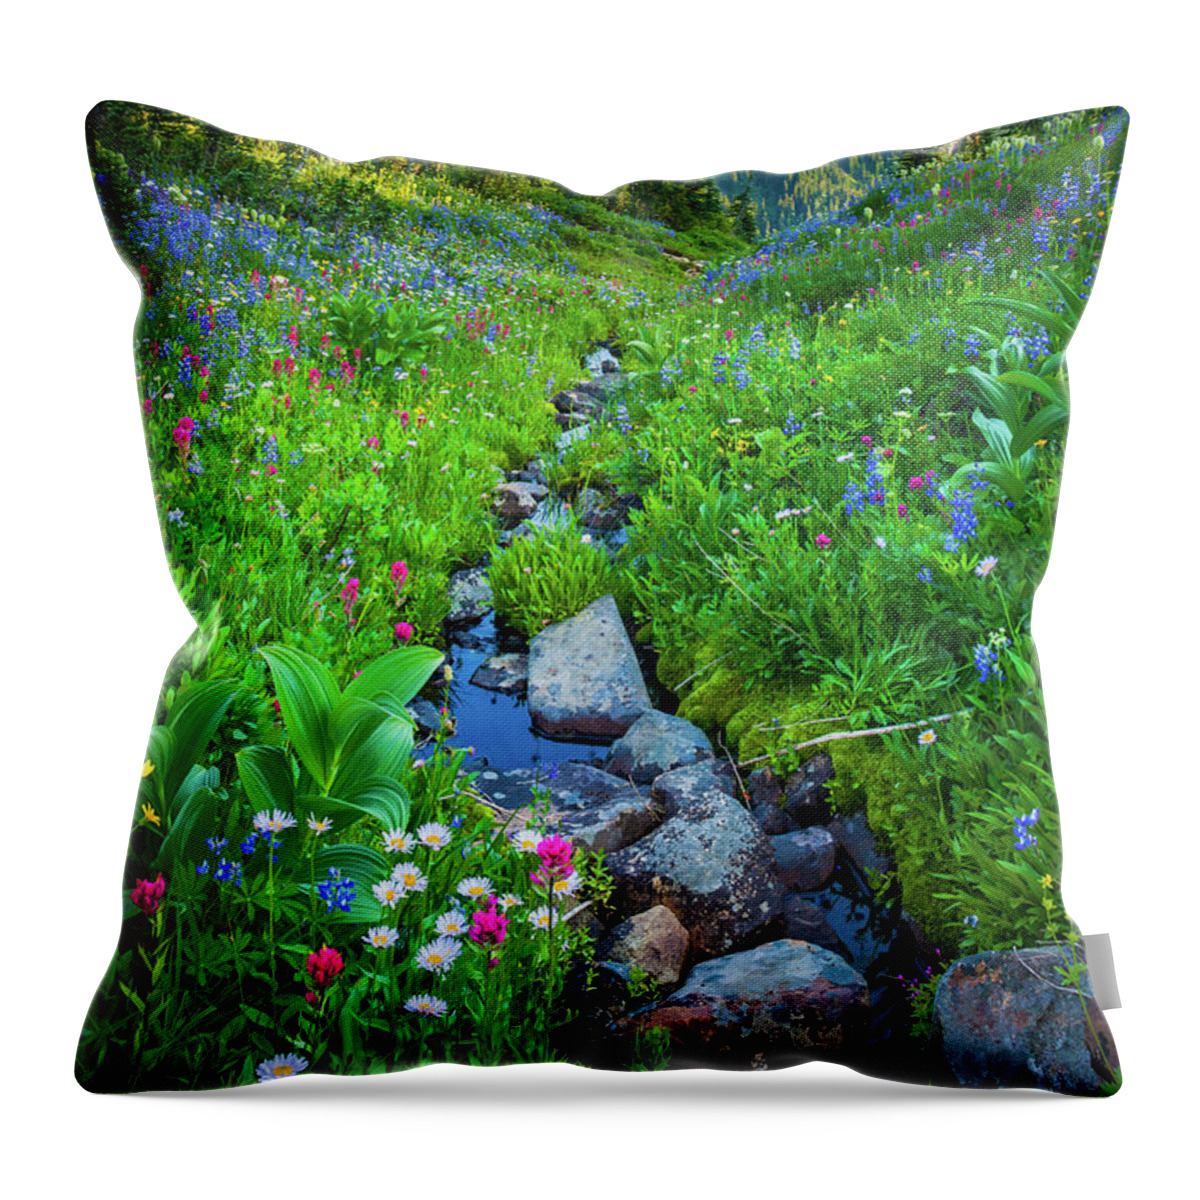 America Throw Pillow featuring the photograph Summer Creek by Inge Johnsson